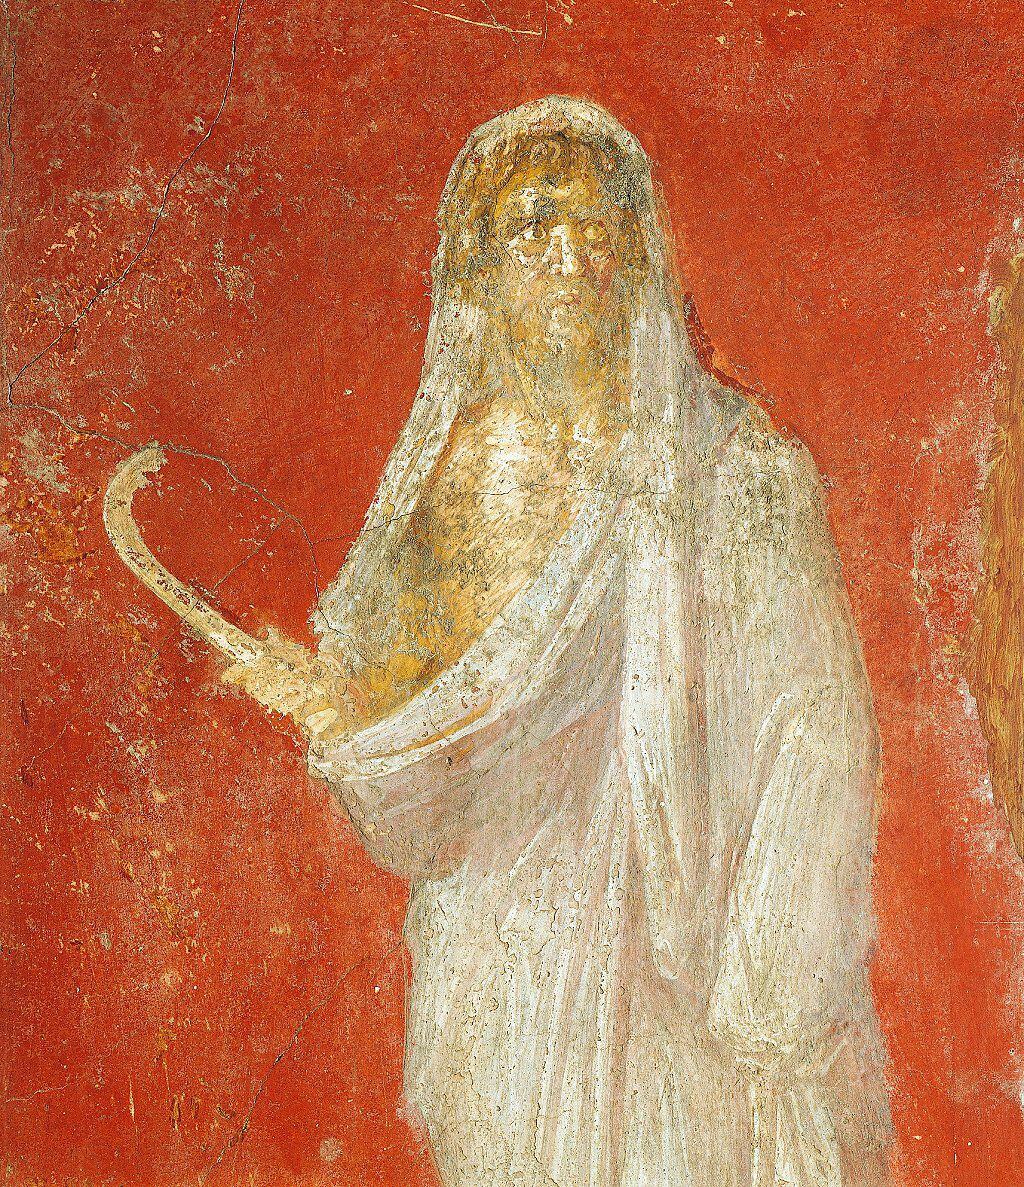 Saturn, here in a first-century AD fresco from Pompeii, could be that sower.  His name, 'Sautran', is written under the oldest of the squares.